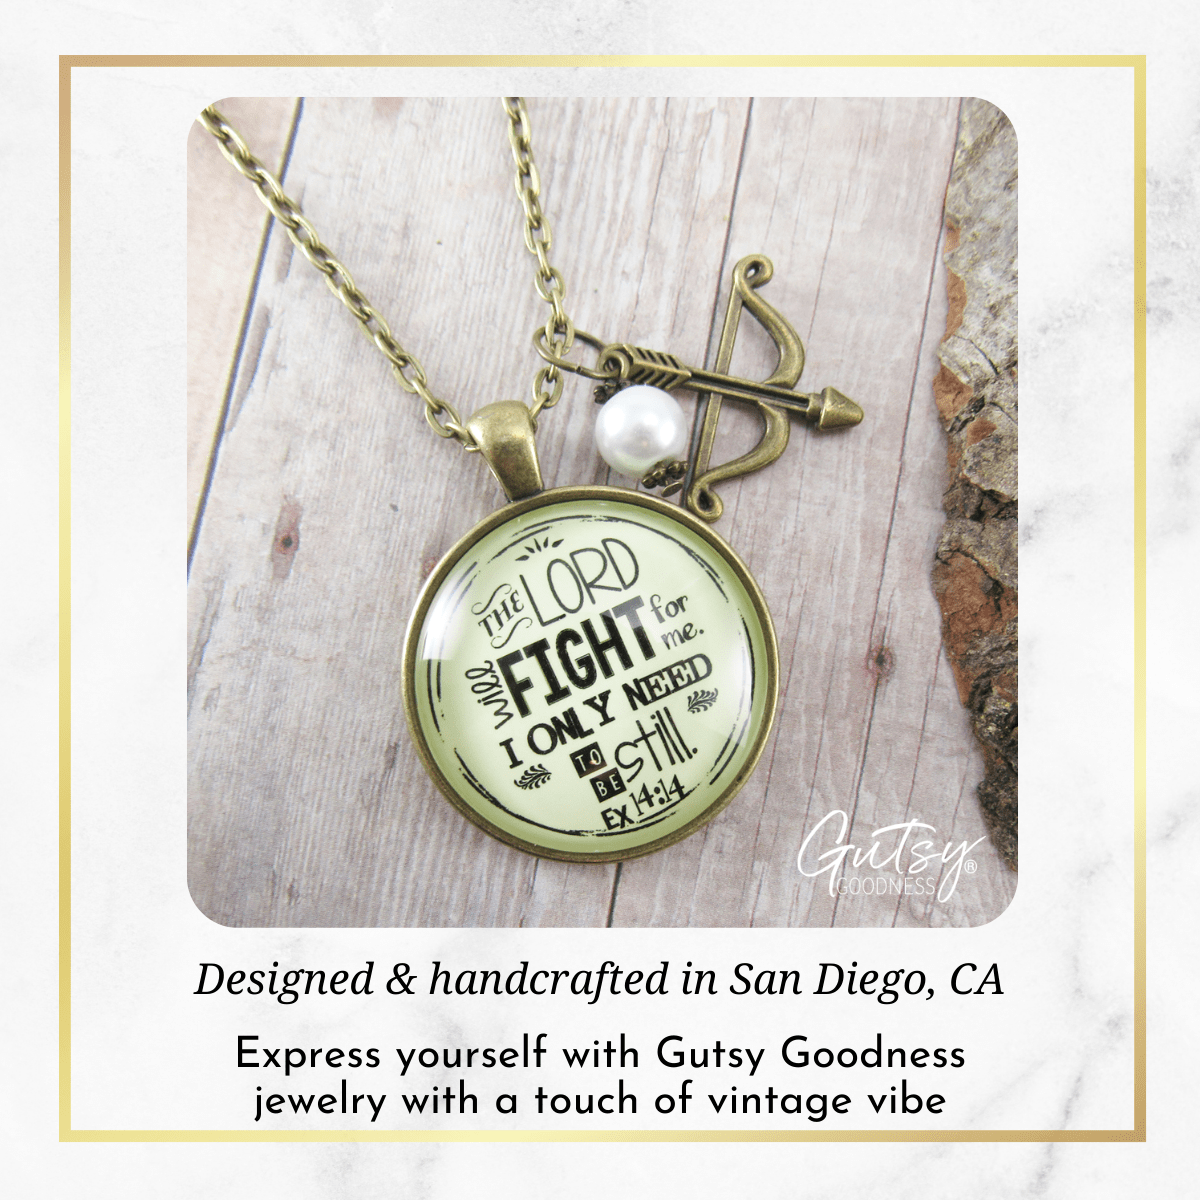 Gutsy Goodness Faith Necklace the Lord Will Fight for You Bow Arrow Charm Jewelry - Gutsy Goodness Handmade Jewelry;Faith Necklace The Lord Will Fight For You Bow Arrow Charm Jewelry - Gutsy Goodness Handmade Jewelry Gifts